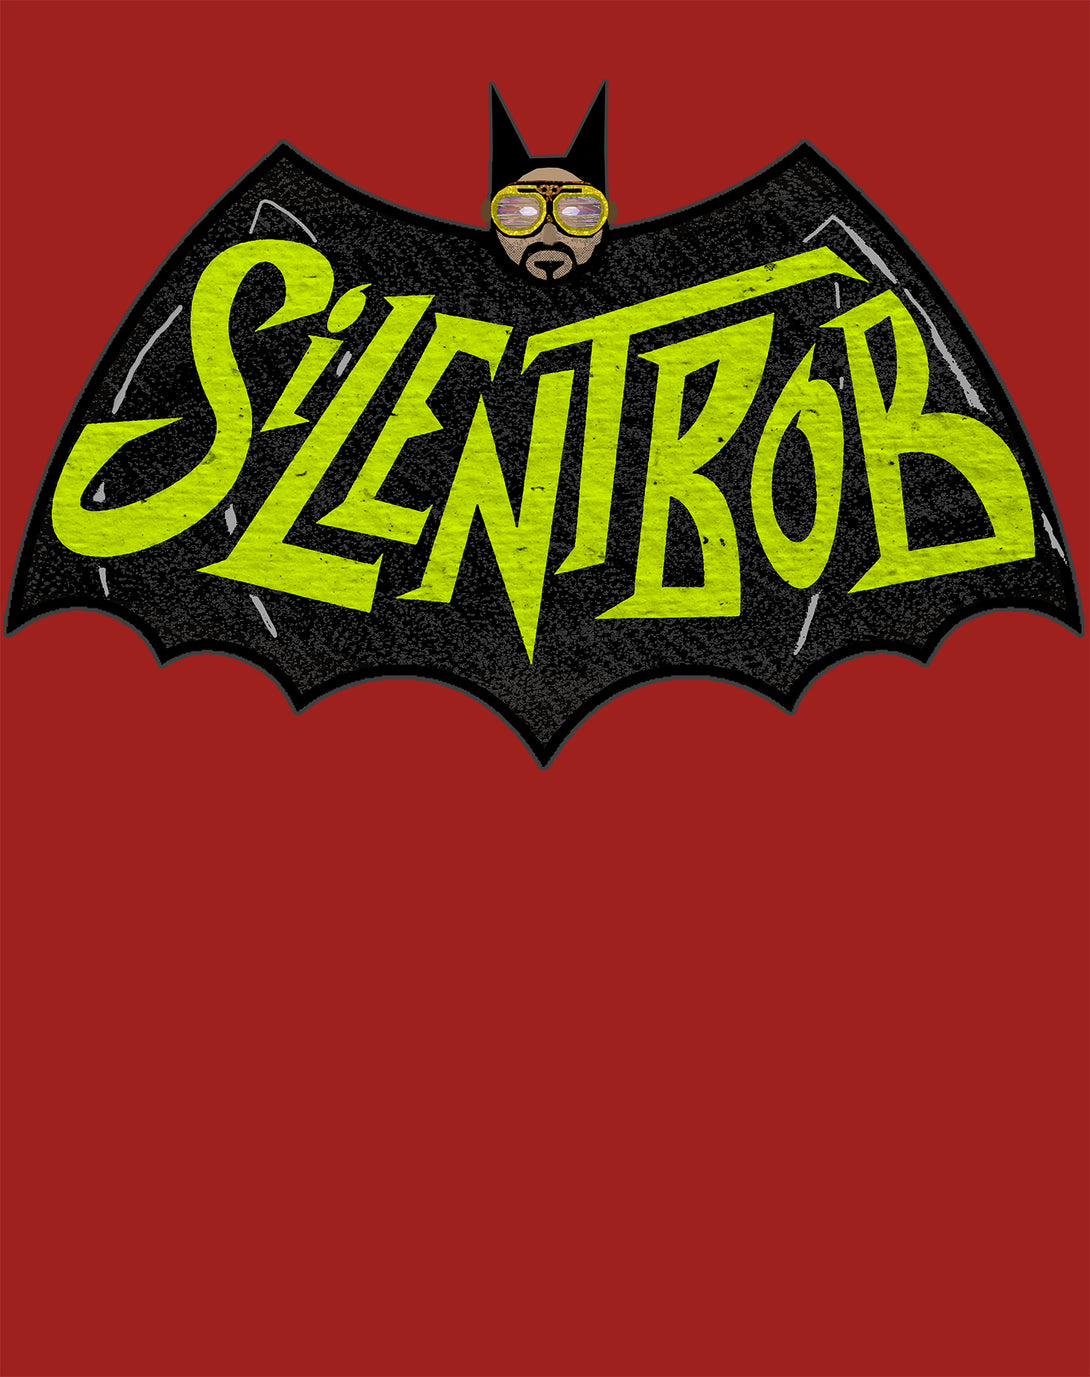 Kevin Smith View Askewniverse Logo Silent Bat Bob Official Women's T-Shirt Red - Urban Species Design Close Up